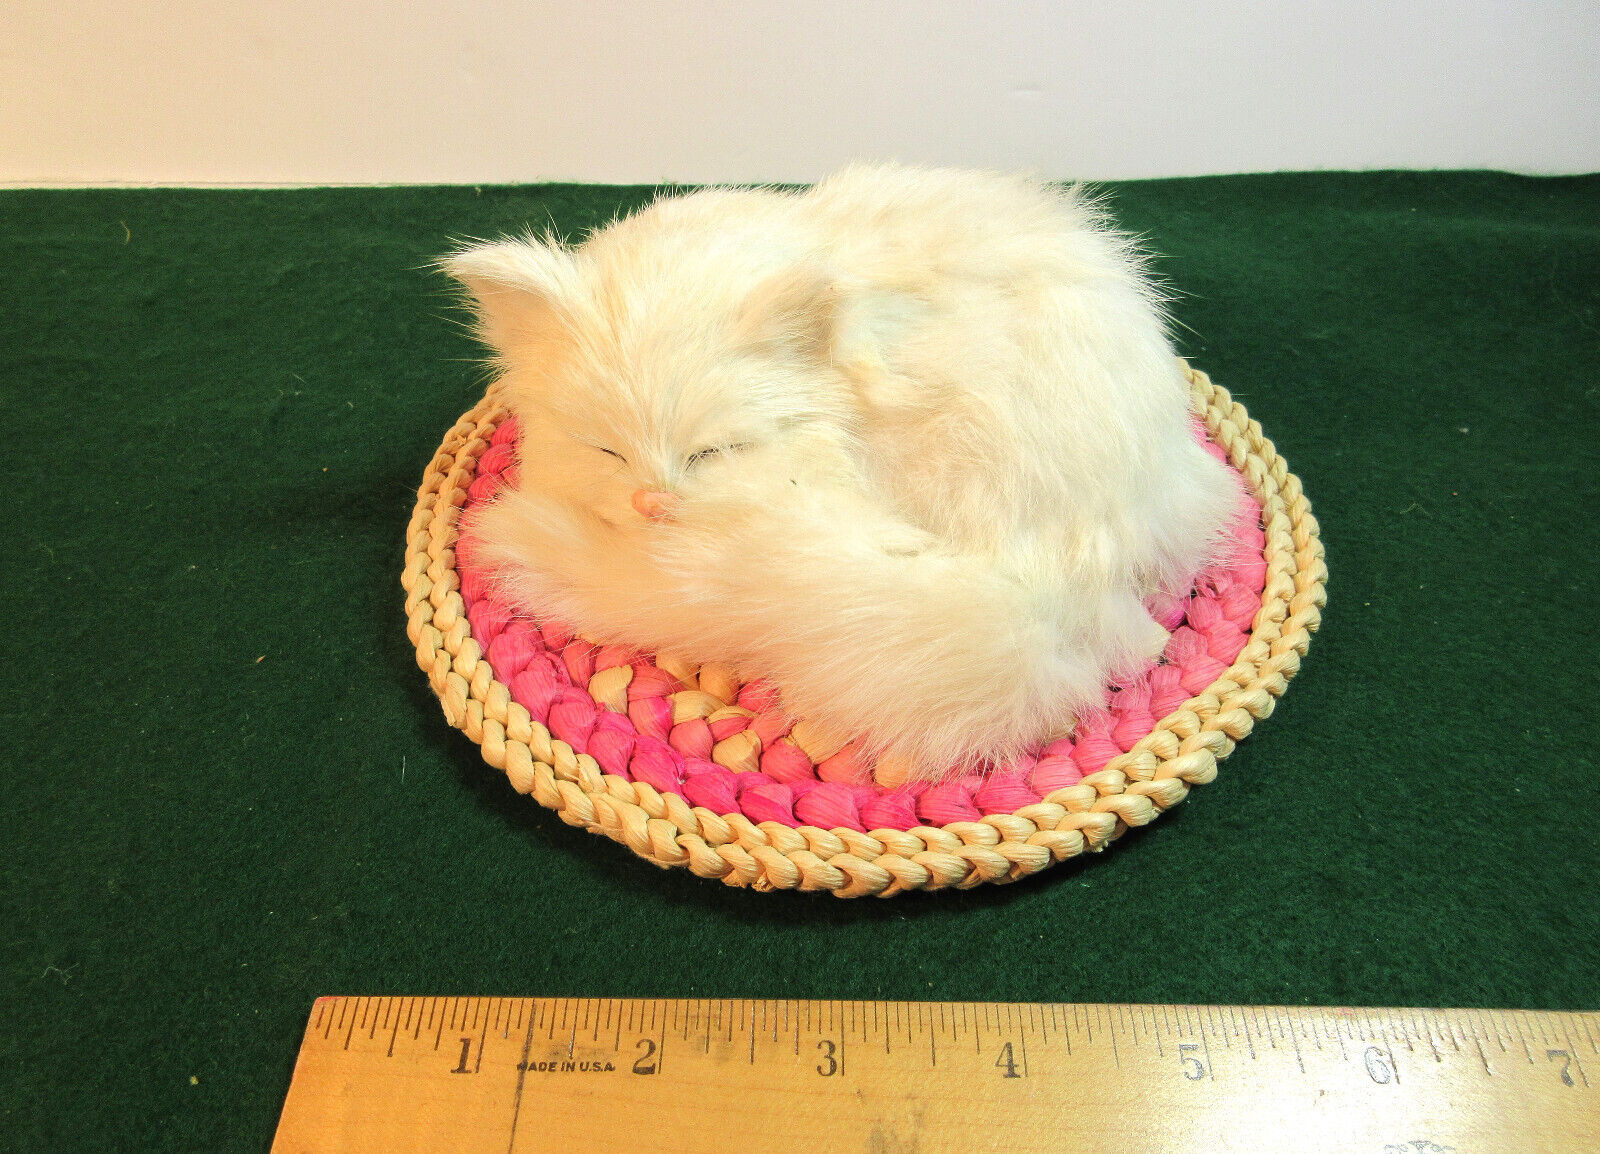 Realistic looking sleeping cat on a coiled mat EUC